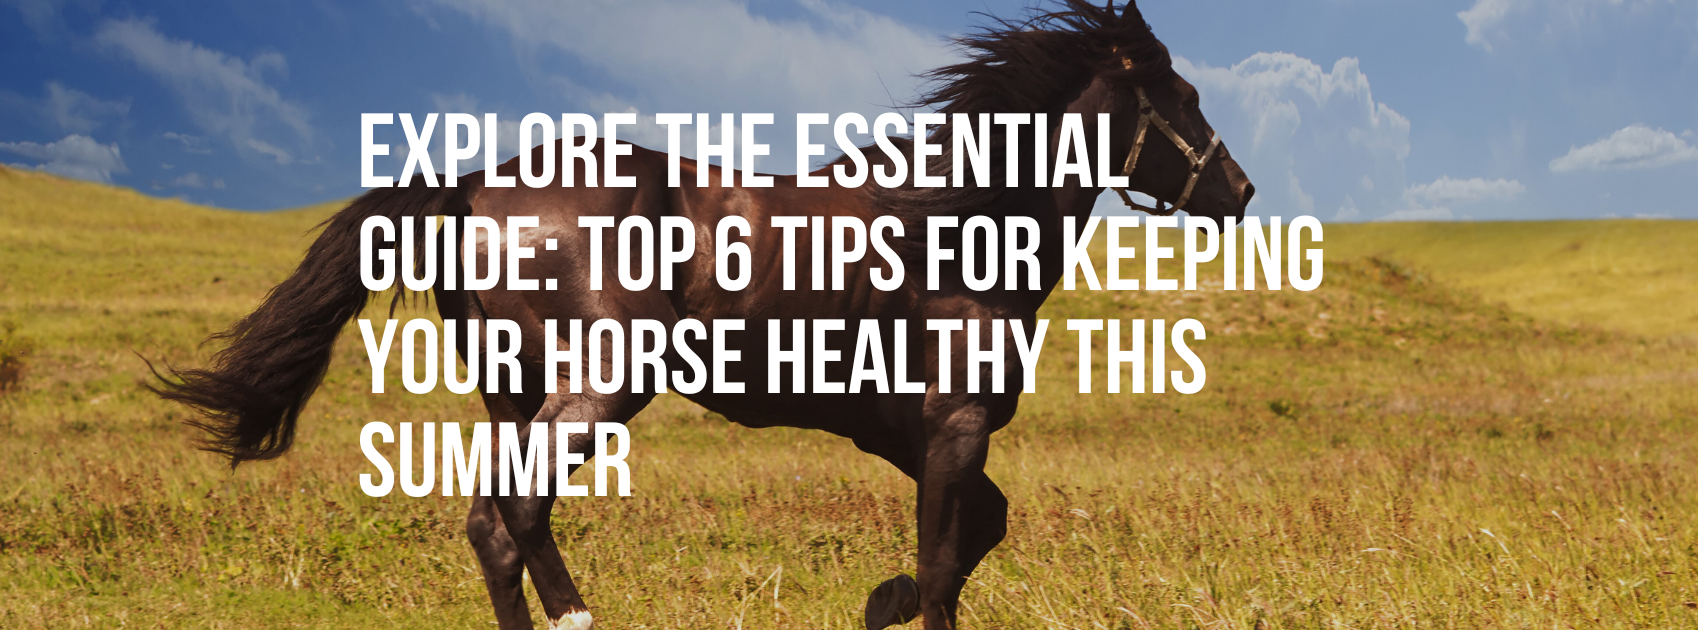 Explore the Essential Guide: Top 6 Tips for Keeping Your Horse Healthy this Summer